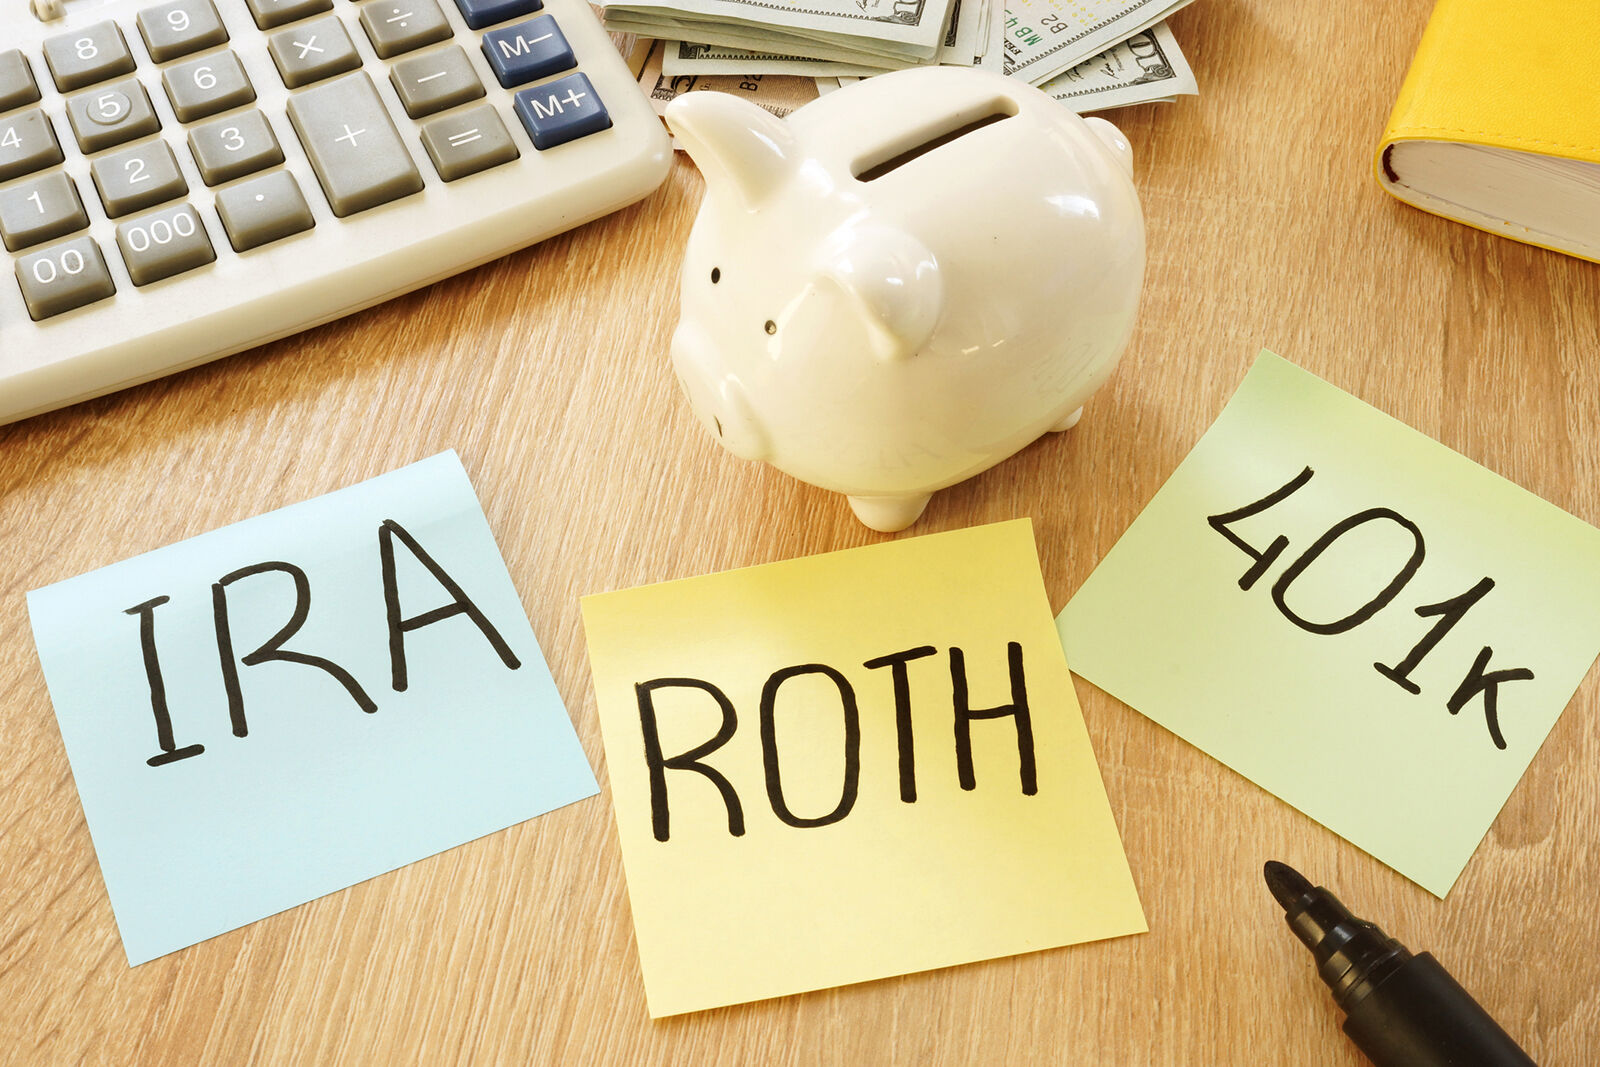 Contribution limits for traditional and Roth IRAs will rise in 2023.    PHOTO CREDIT: Tribune News Service